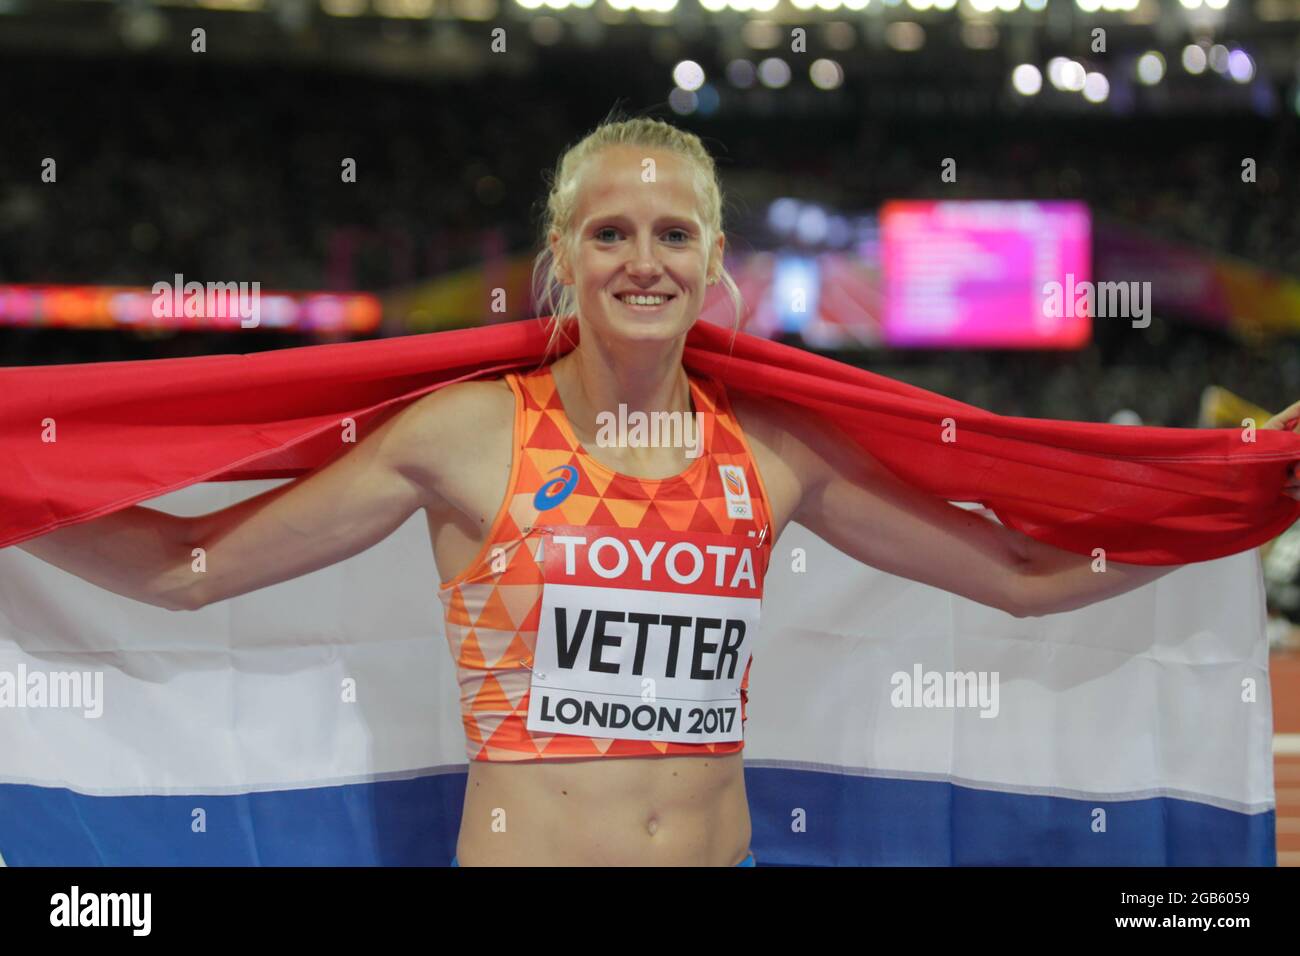 Anouk Vetter (Nederlandt) at the 800m Heptatlon Women of the IAAF World Championships in Athletics on August 6, 201st at the Olympic Stadium in London, Great Britain Stock Photo